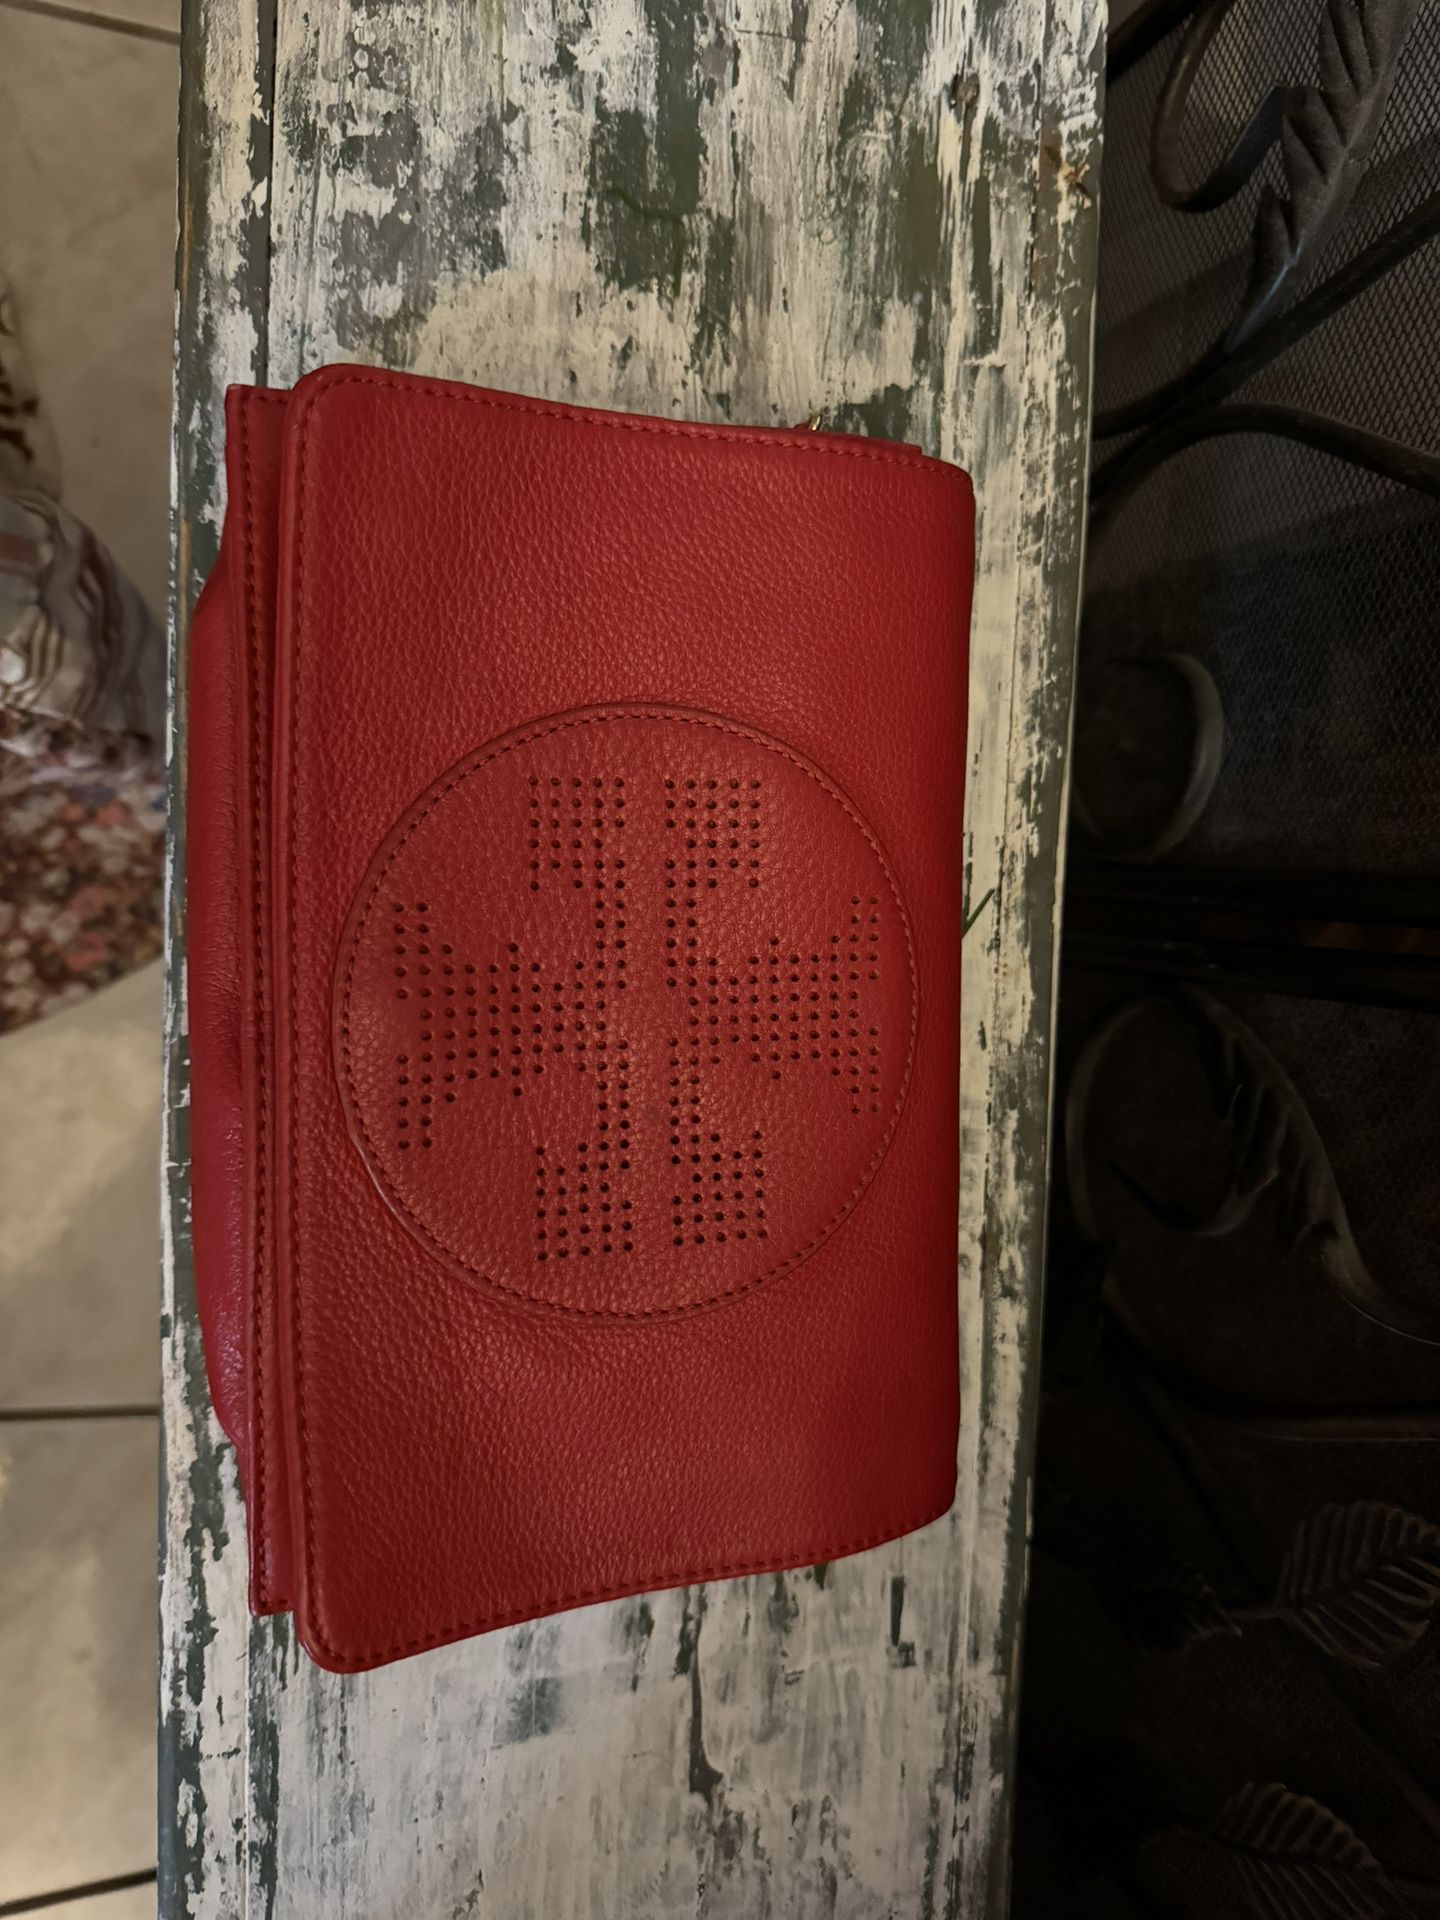 Tory Burch Red Leather Perforated Logo Fold Over Crossbody Bag like new smoke free